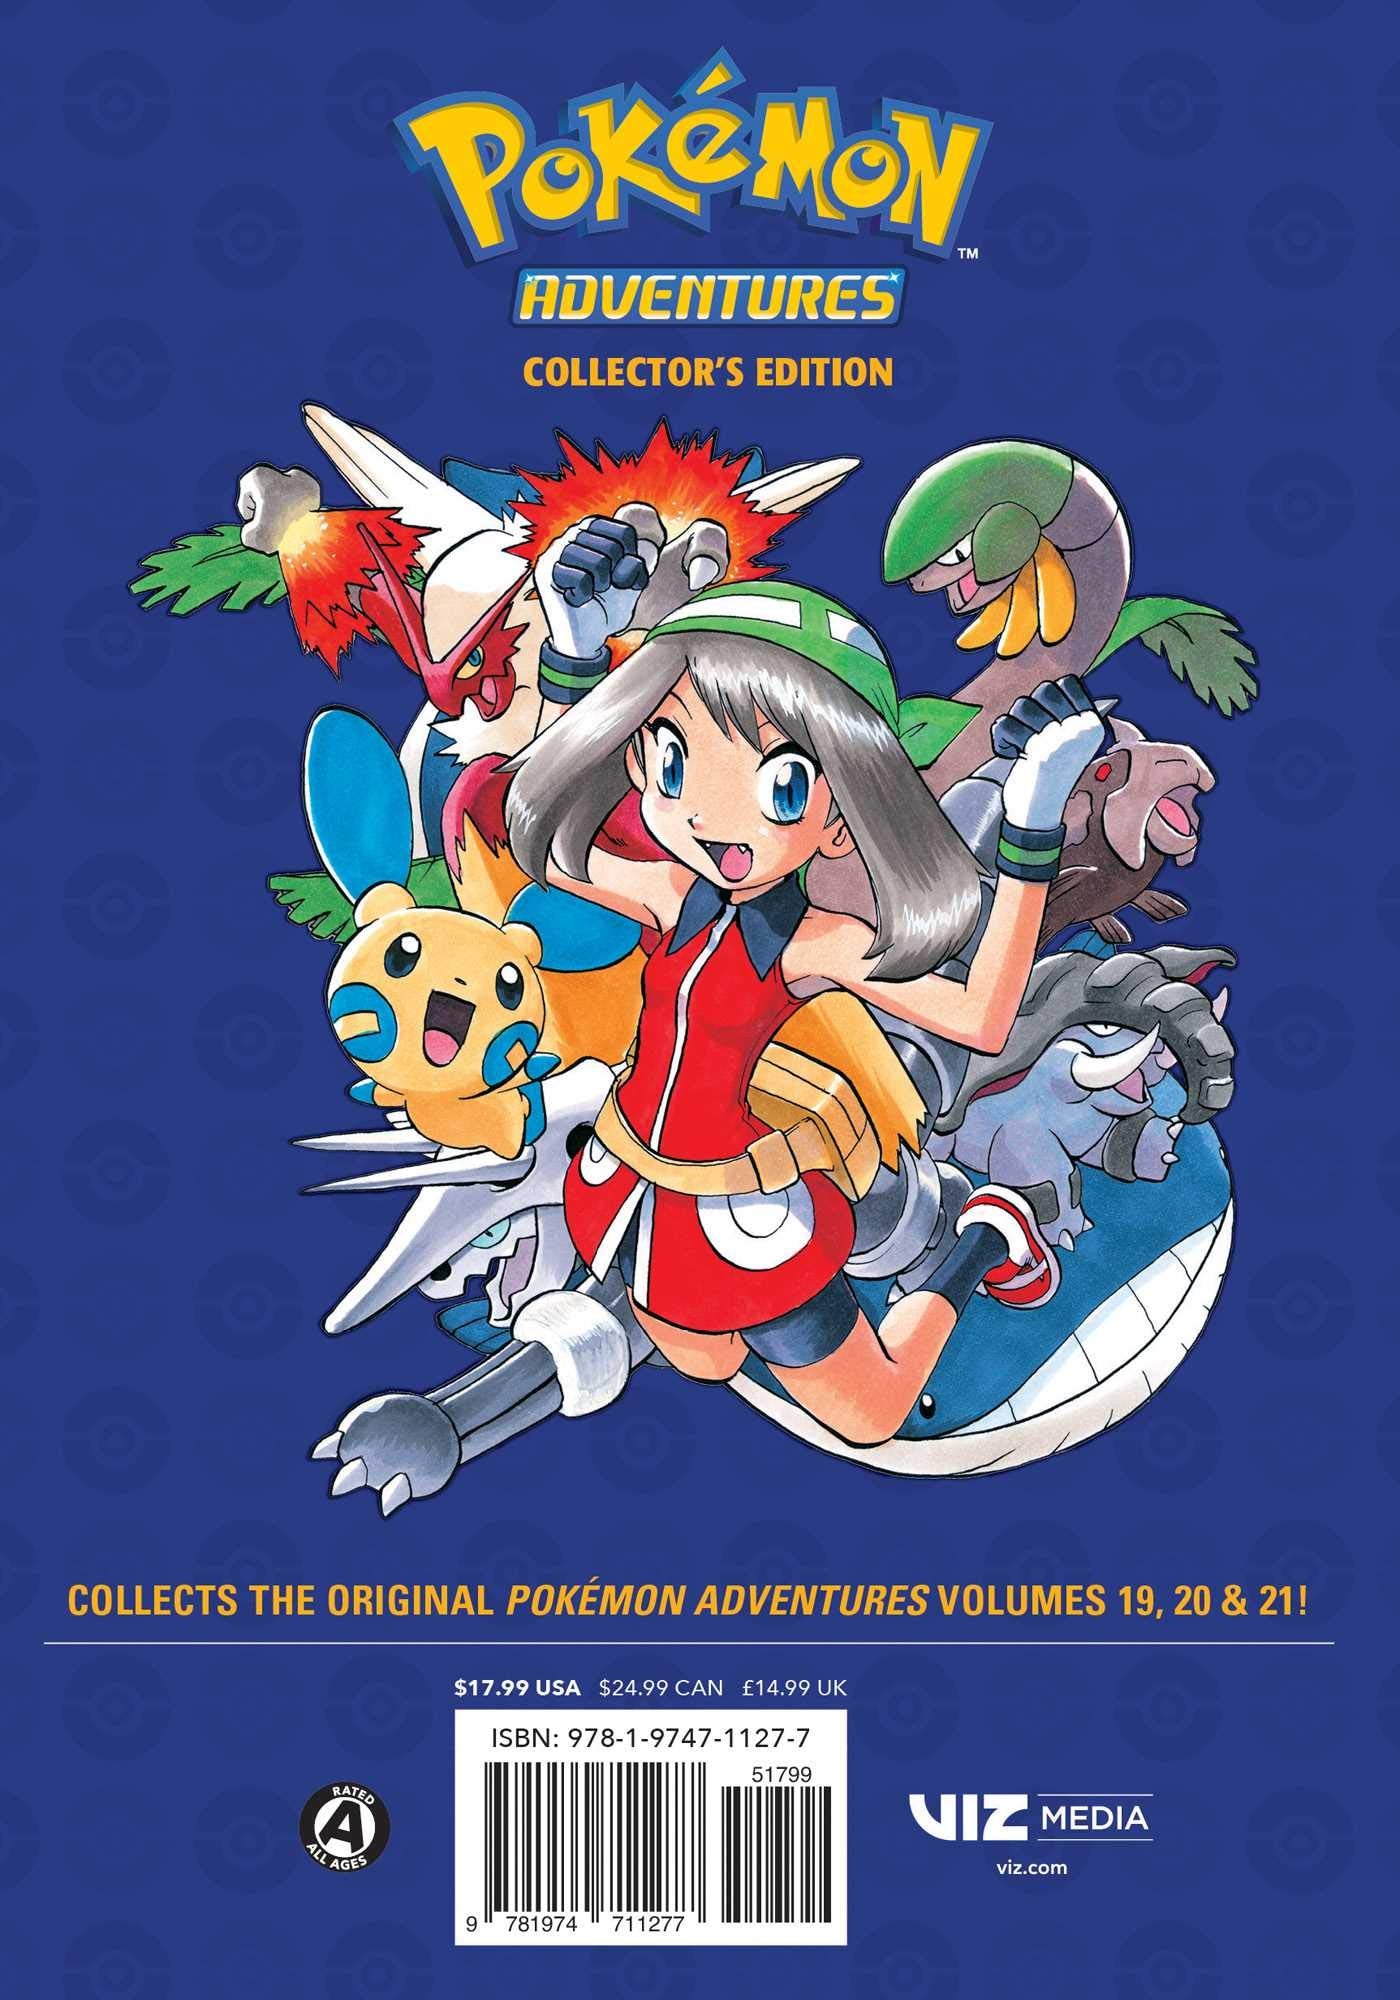 THE MANGA COLLECTOR'S EDITION, VOLUME ONE